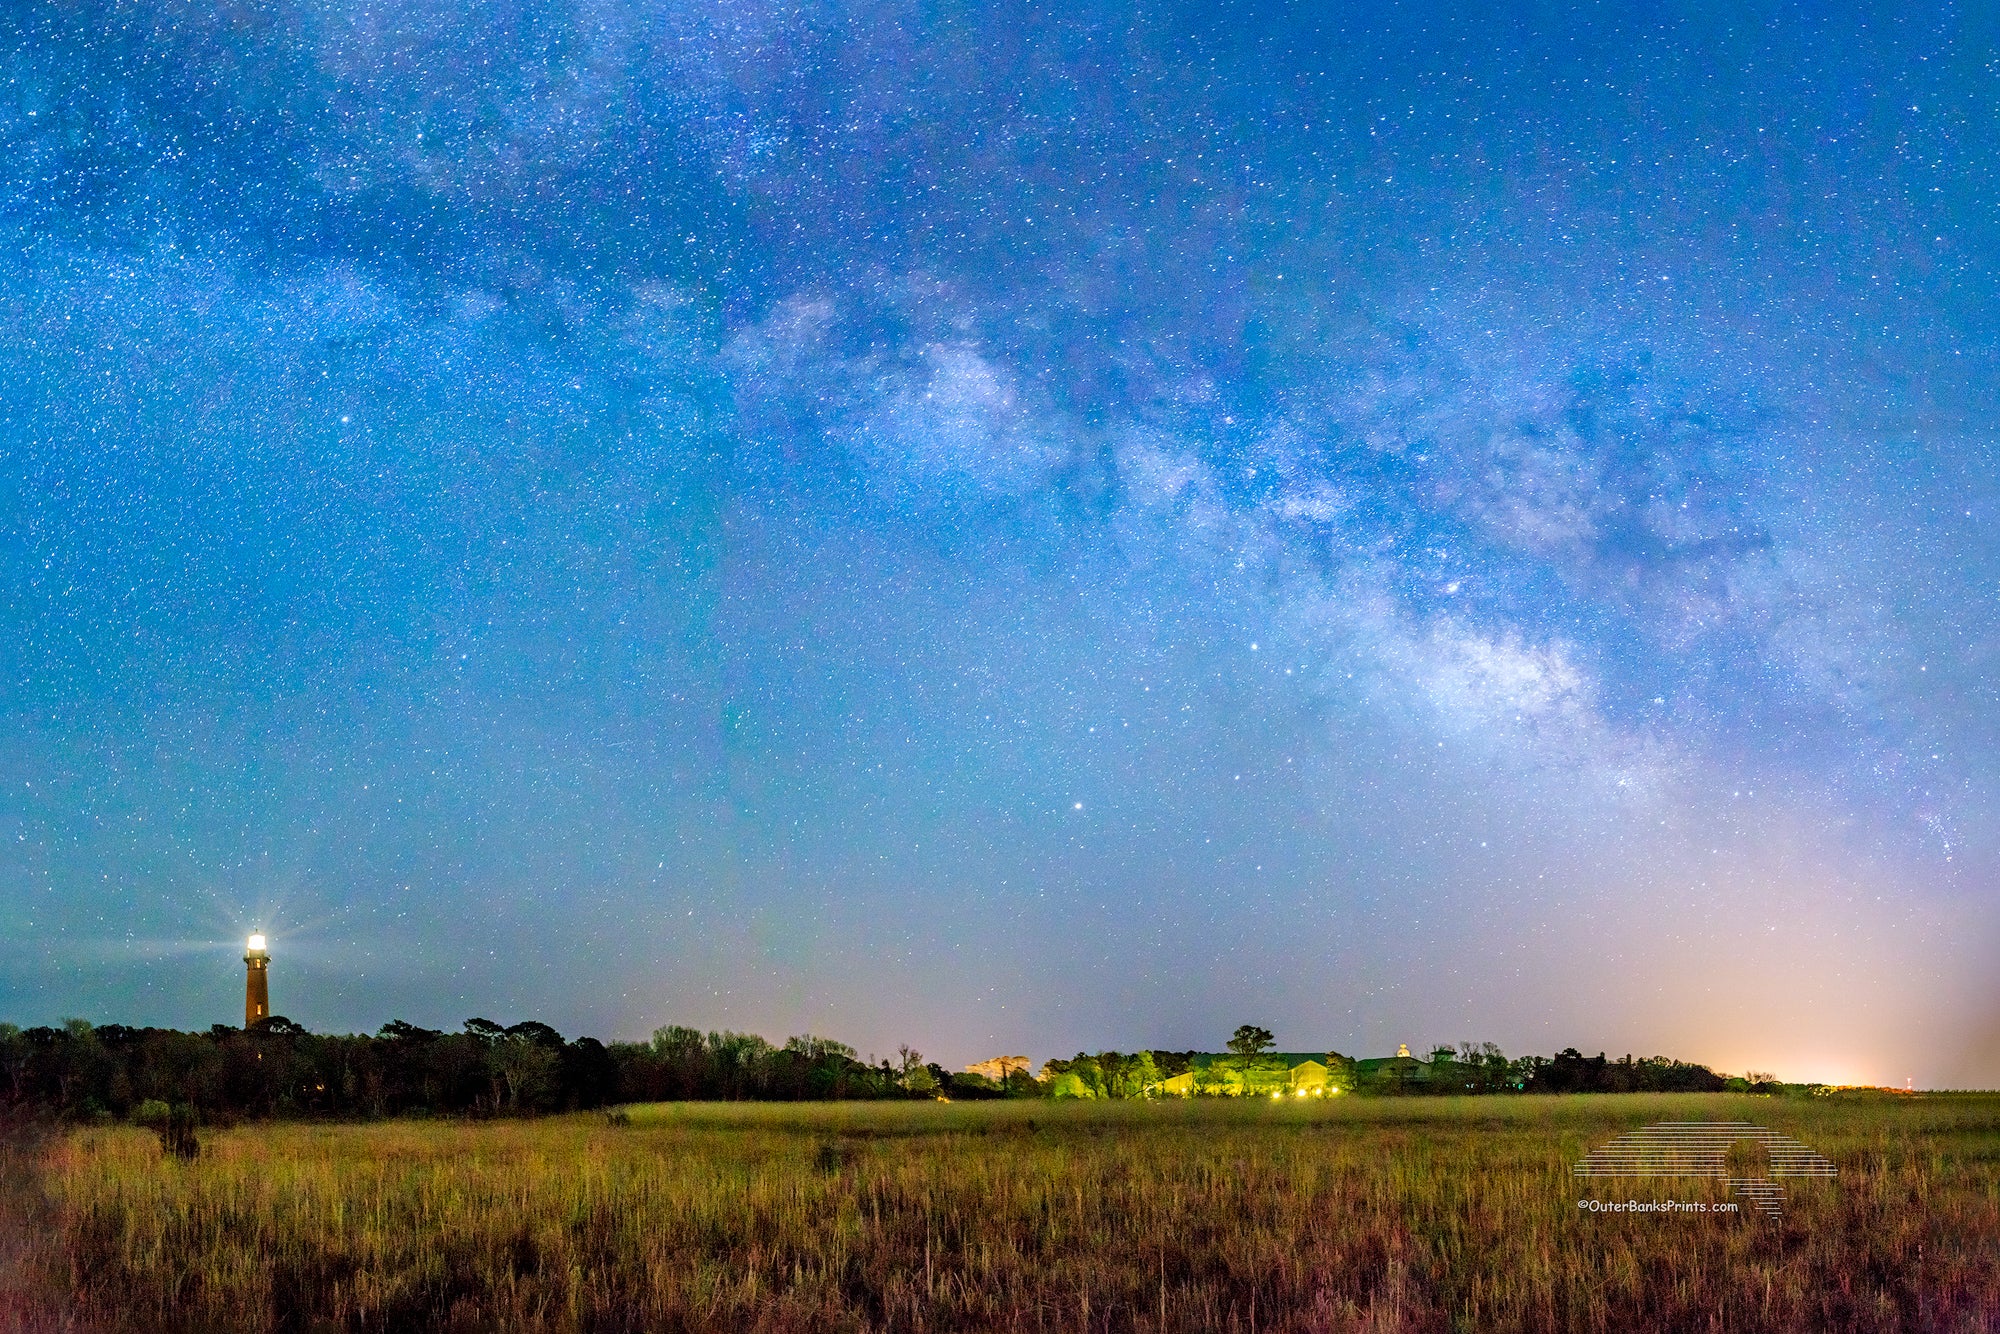 Milkyway galaxy above Corolla on the Outer Banks of NC.